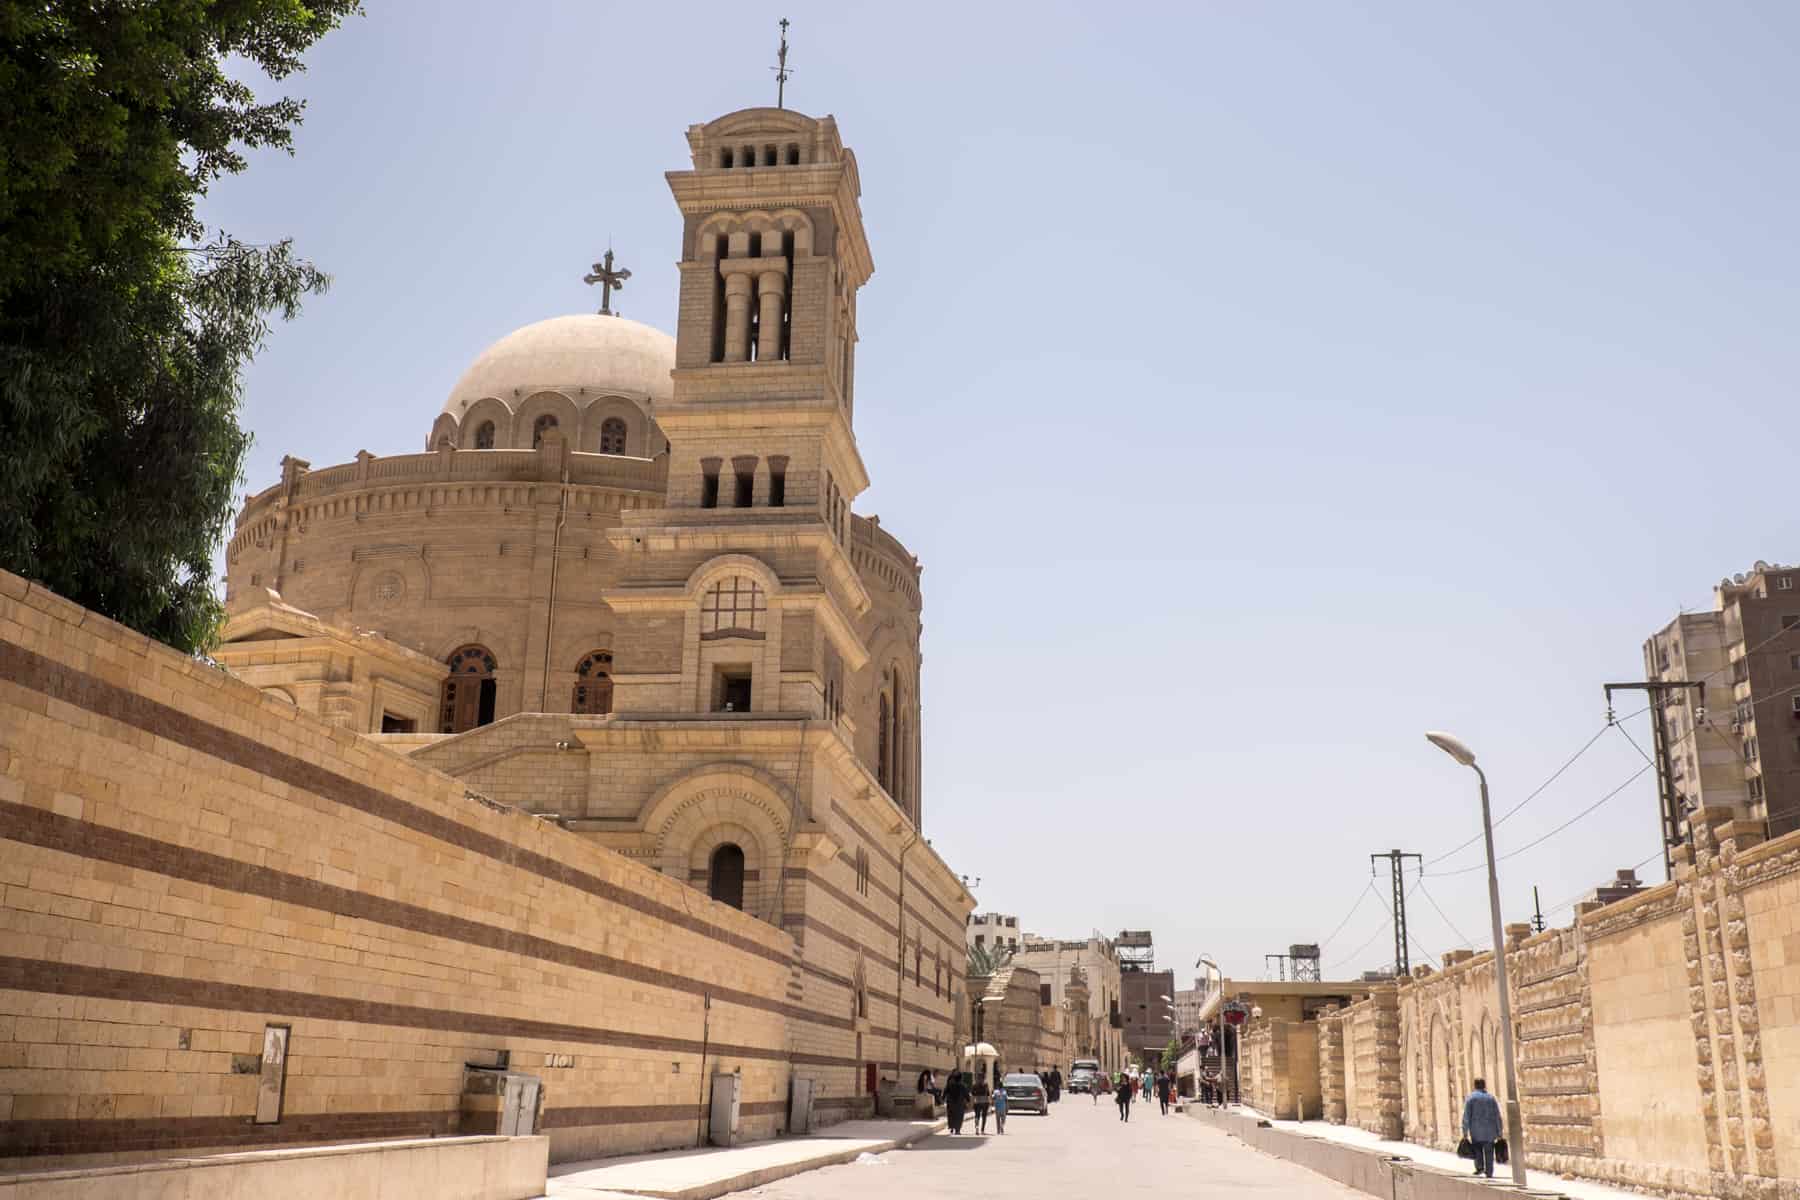 Street views of Egypt's Capital, Cairo and the pastel cream buildings of the old town with a church on the left hand side